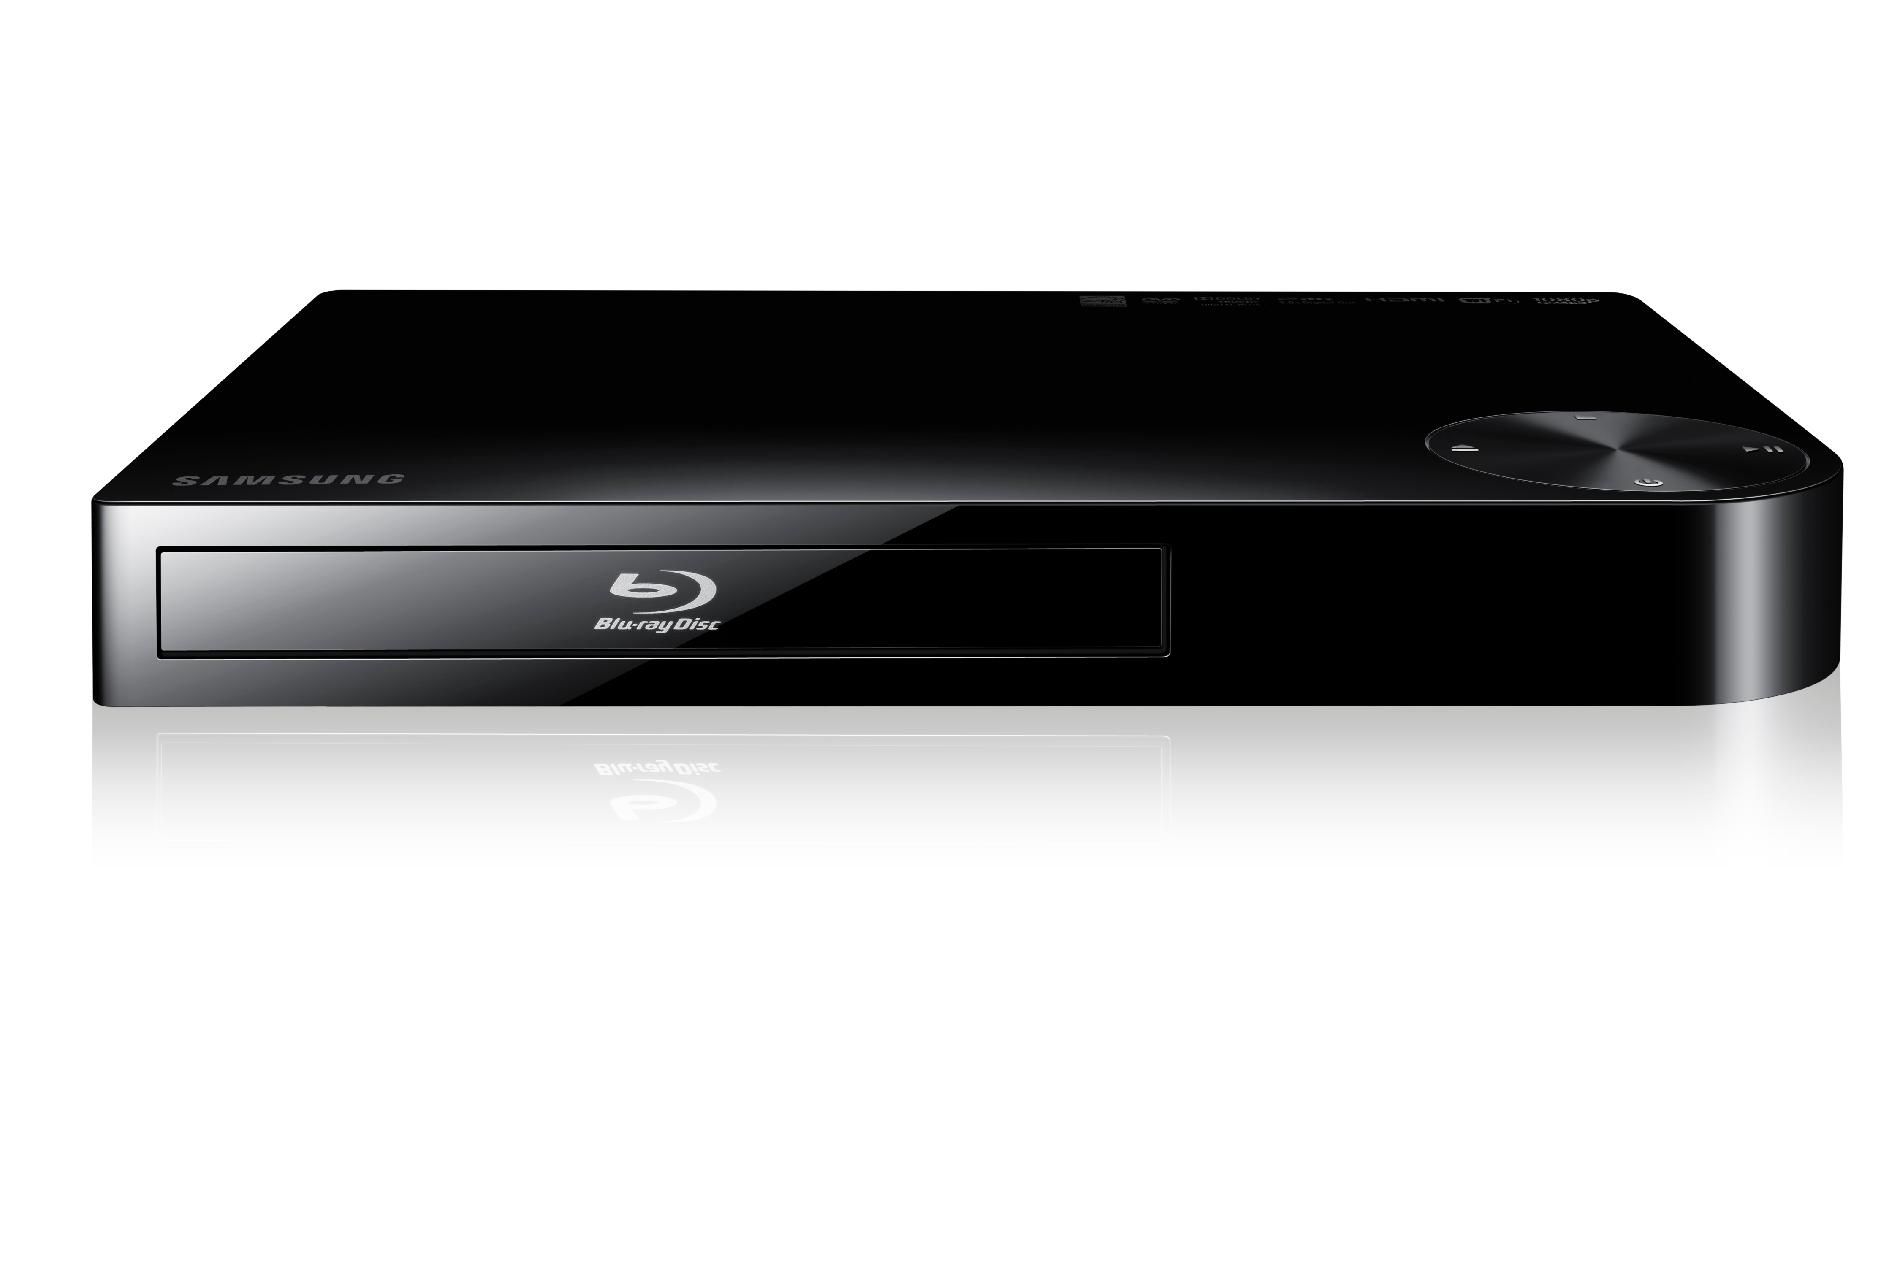 Samsung Smart Blu-ray Disc Player with Built in Wi-Fi - BD-E5400